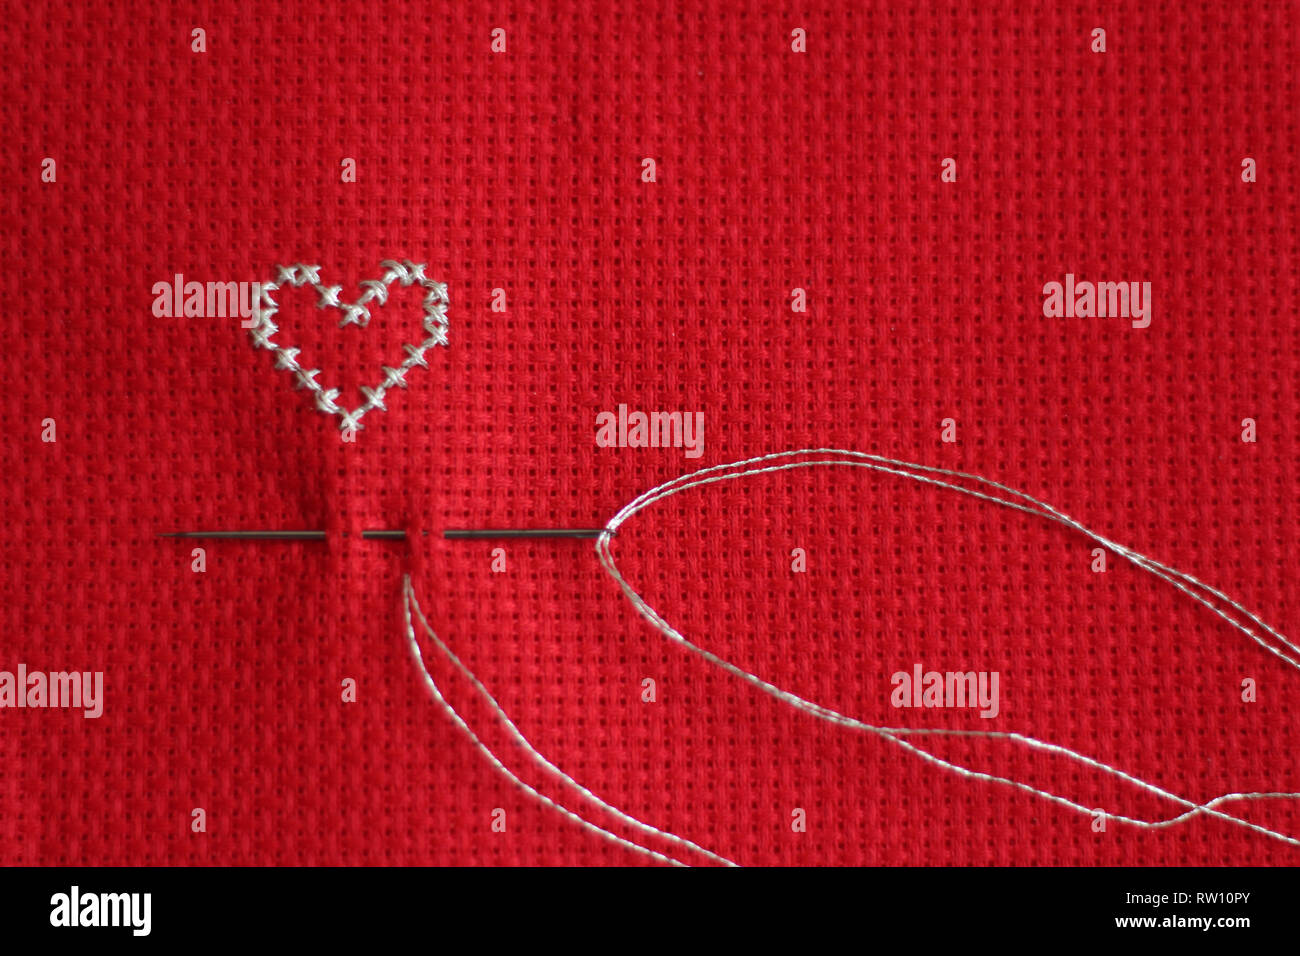 Silver cross stitched heart, needle and thread, red background Stock Photo